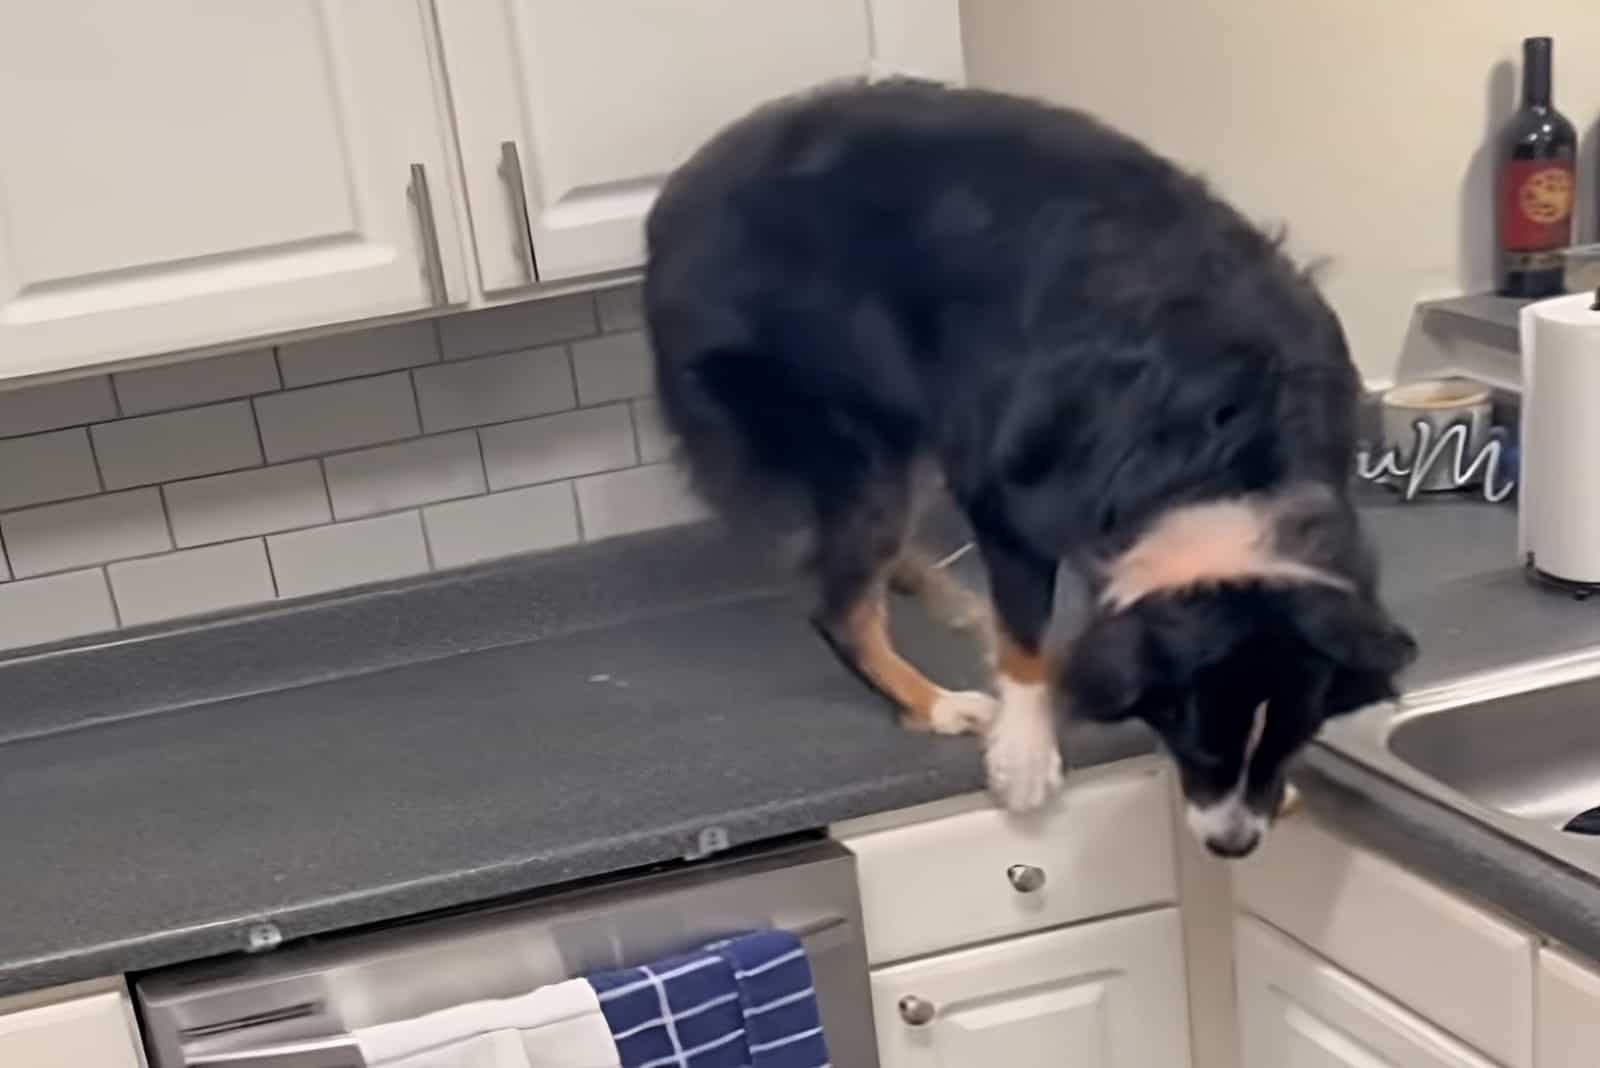 Bailey expertly navigates the kitchen